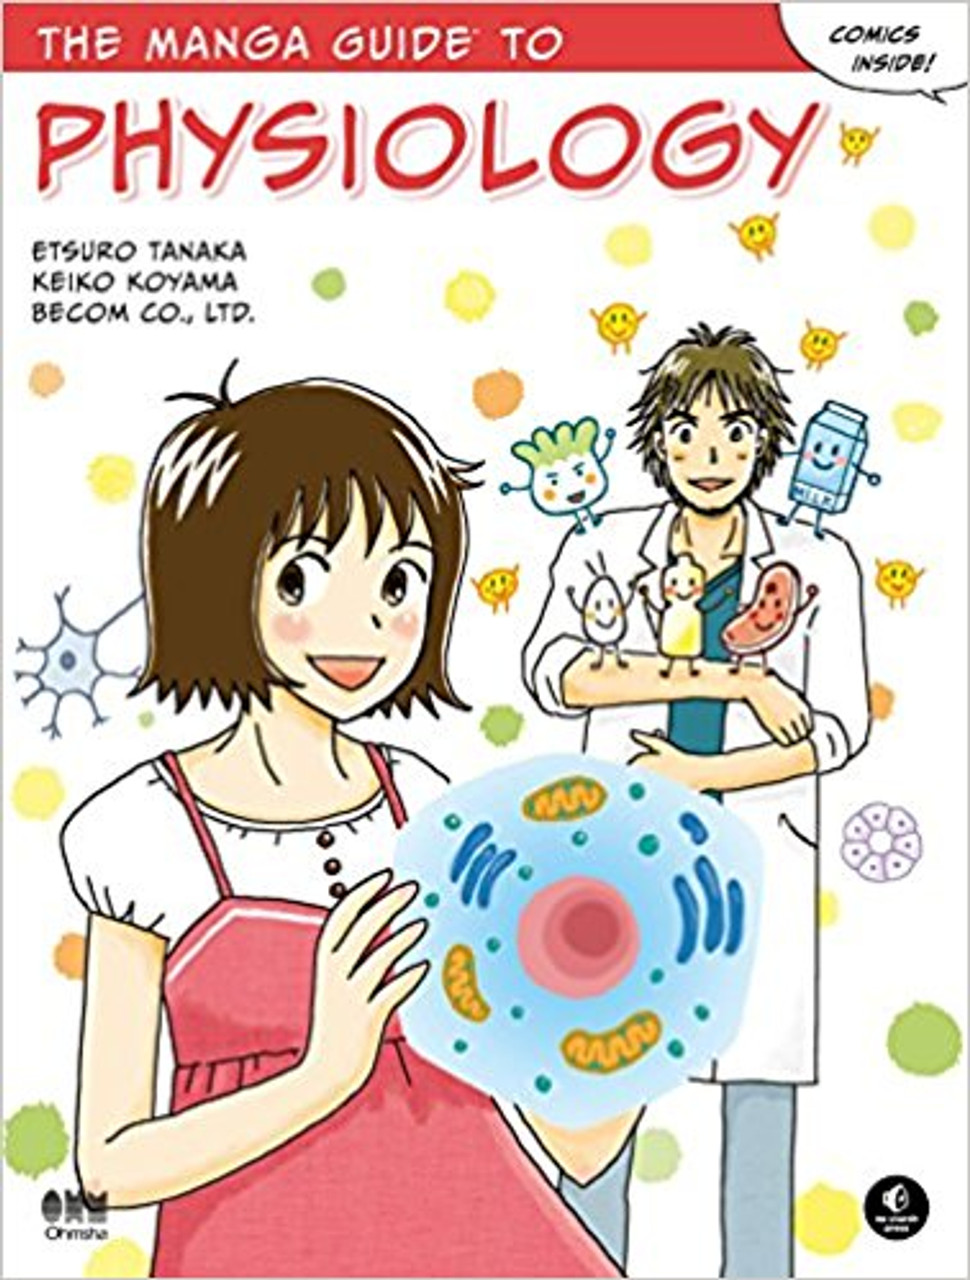 Join Kumiko in "The Manga Guide to Physiology" as she examines the inner workings of the body while training hard for the campus marathon. You'll learn all about: How the digestive system and the Citric Acid Cycle break food down into nutrients and energy How the body regulates temperature and vital fluids The body's powerful cell defense system, led by helper T cells and enforced by macrophages The architecture of the central nervous system The kidneys' many talents: blood filtration, homeostasis, and energy production